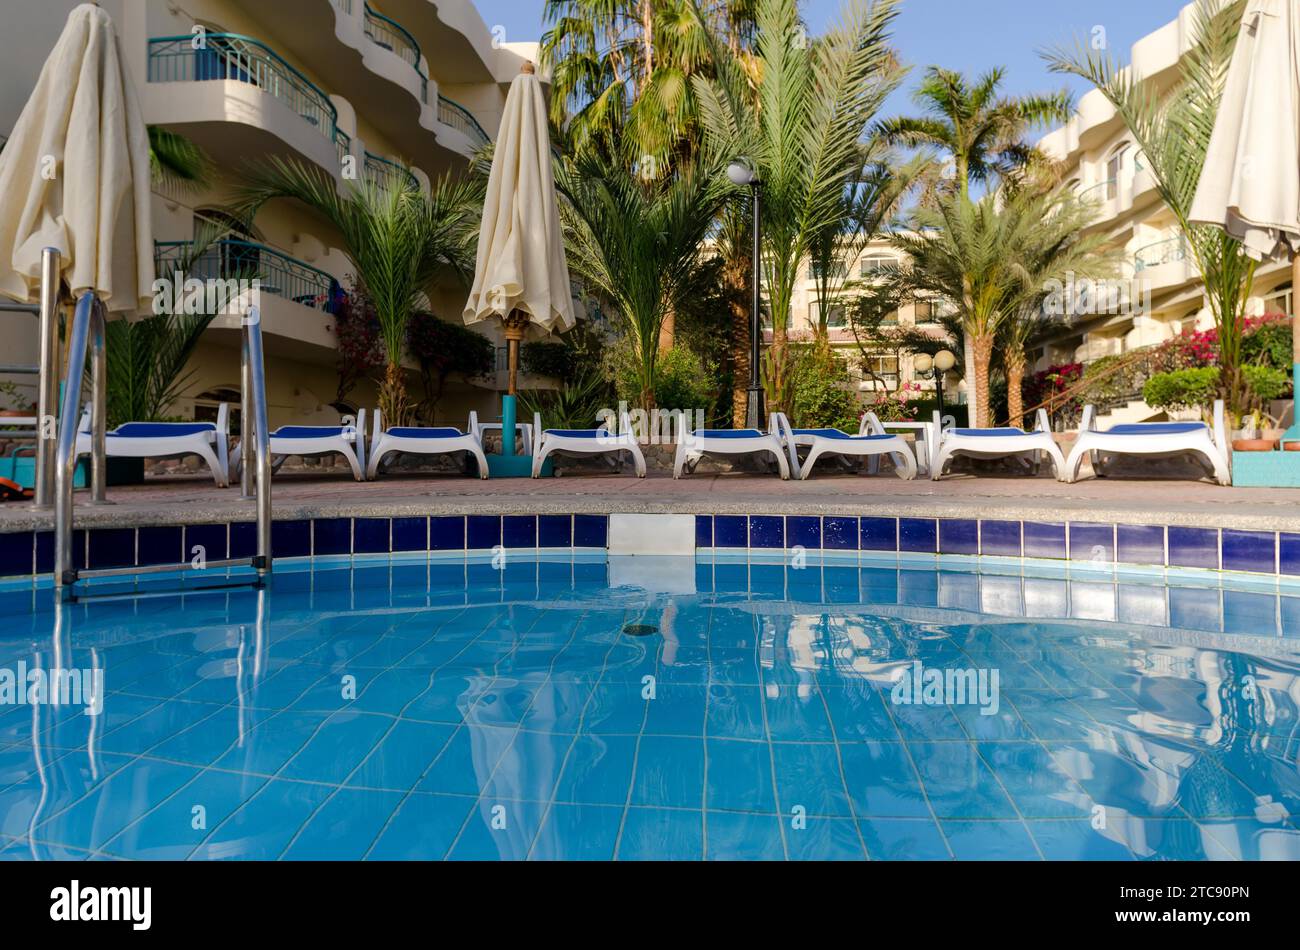 Pool without people and palm trees in an empty hotel in Hurghada Egypt Stock Photo